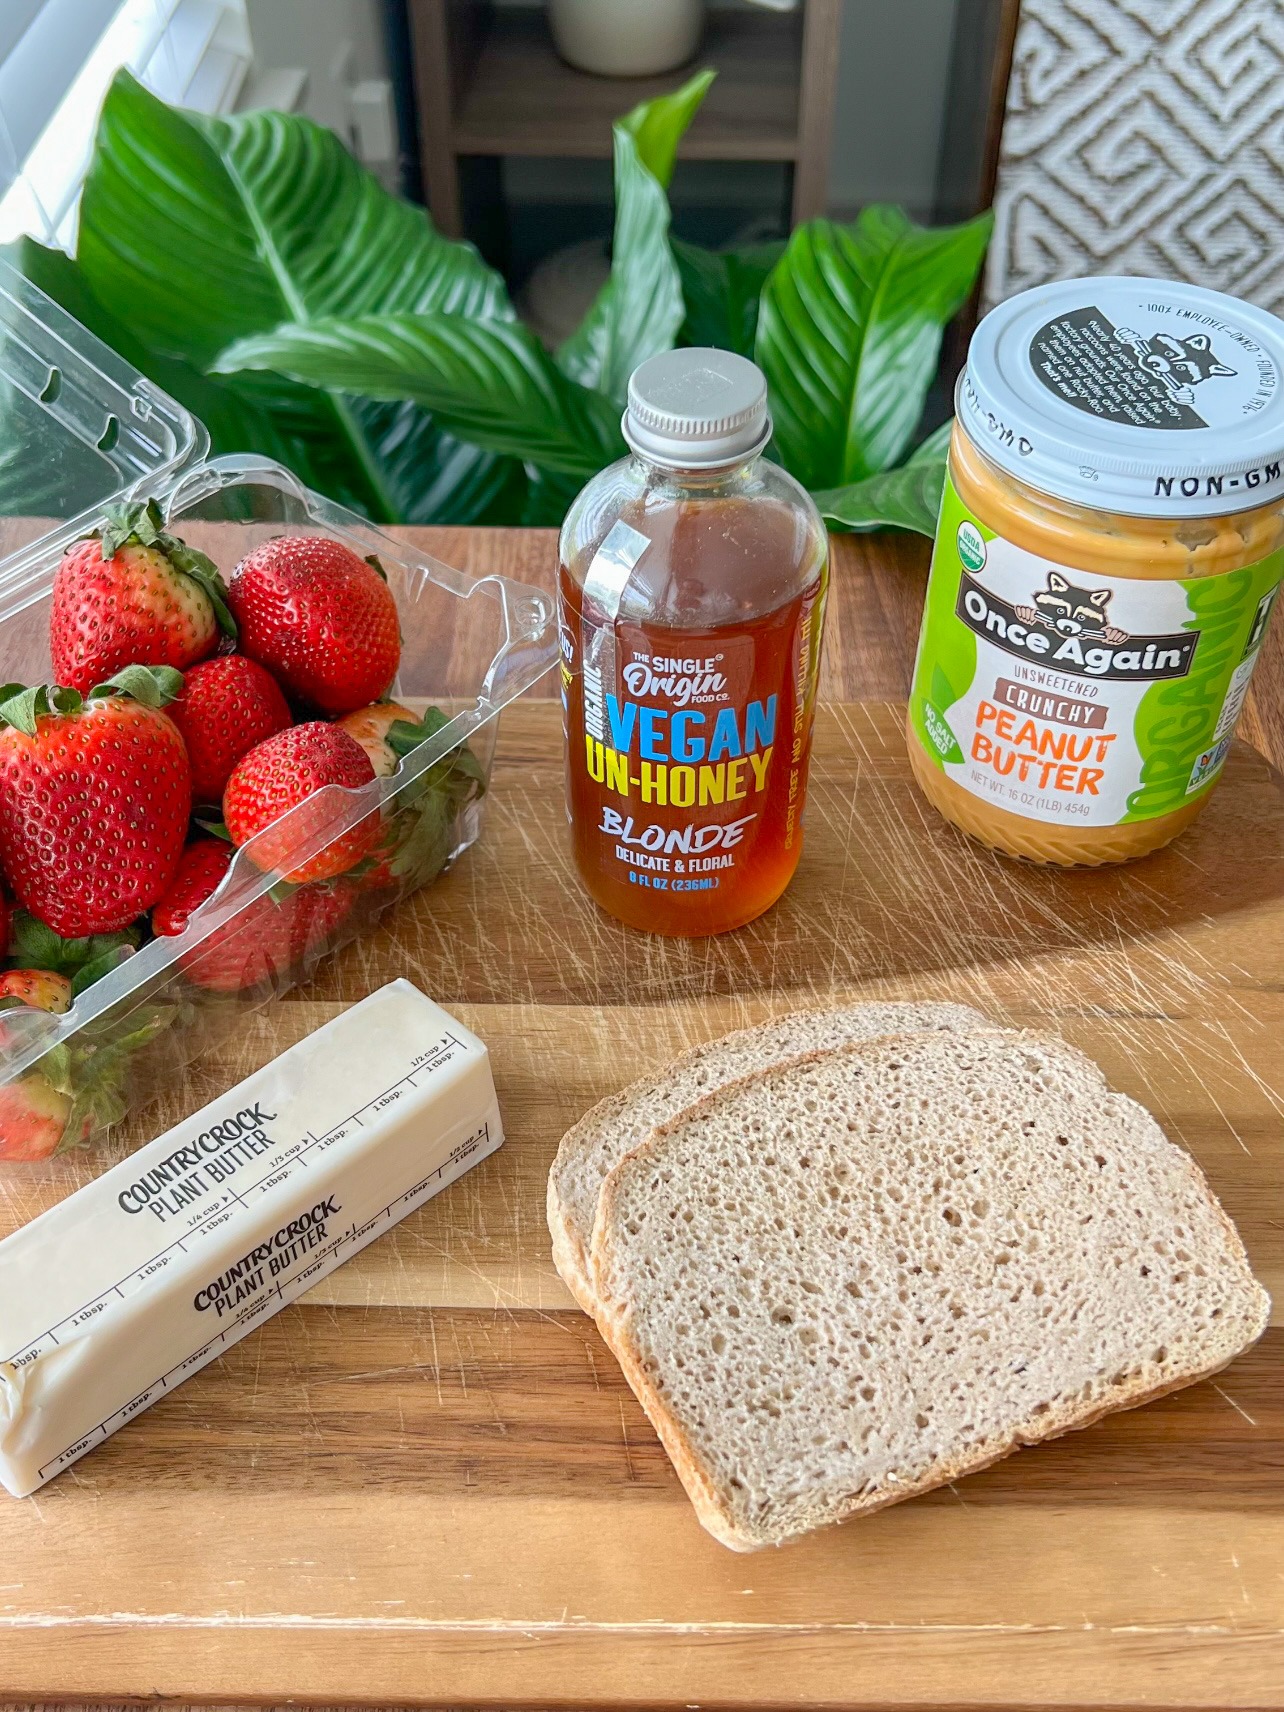 ingredients for the peanut butter and strawberry sandwich include vegan un-honey, peanut butter, strawberries, country crock plant-butter, and gluten-free bread